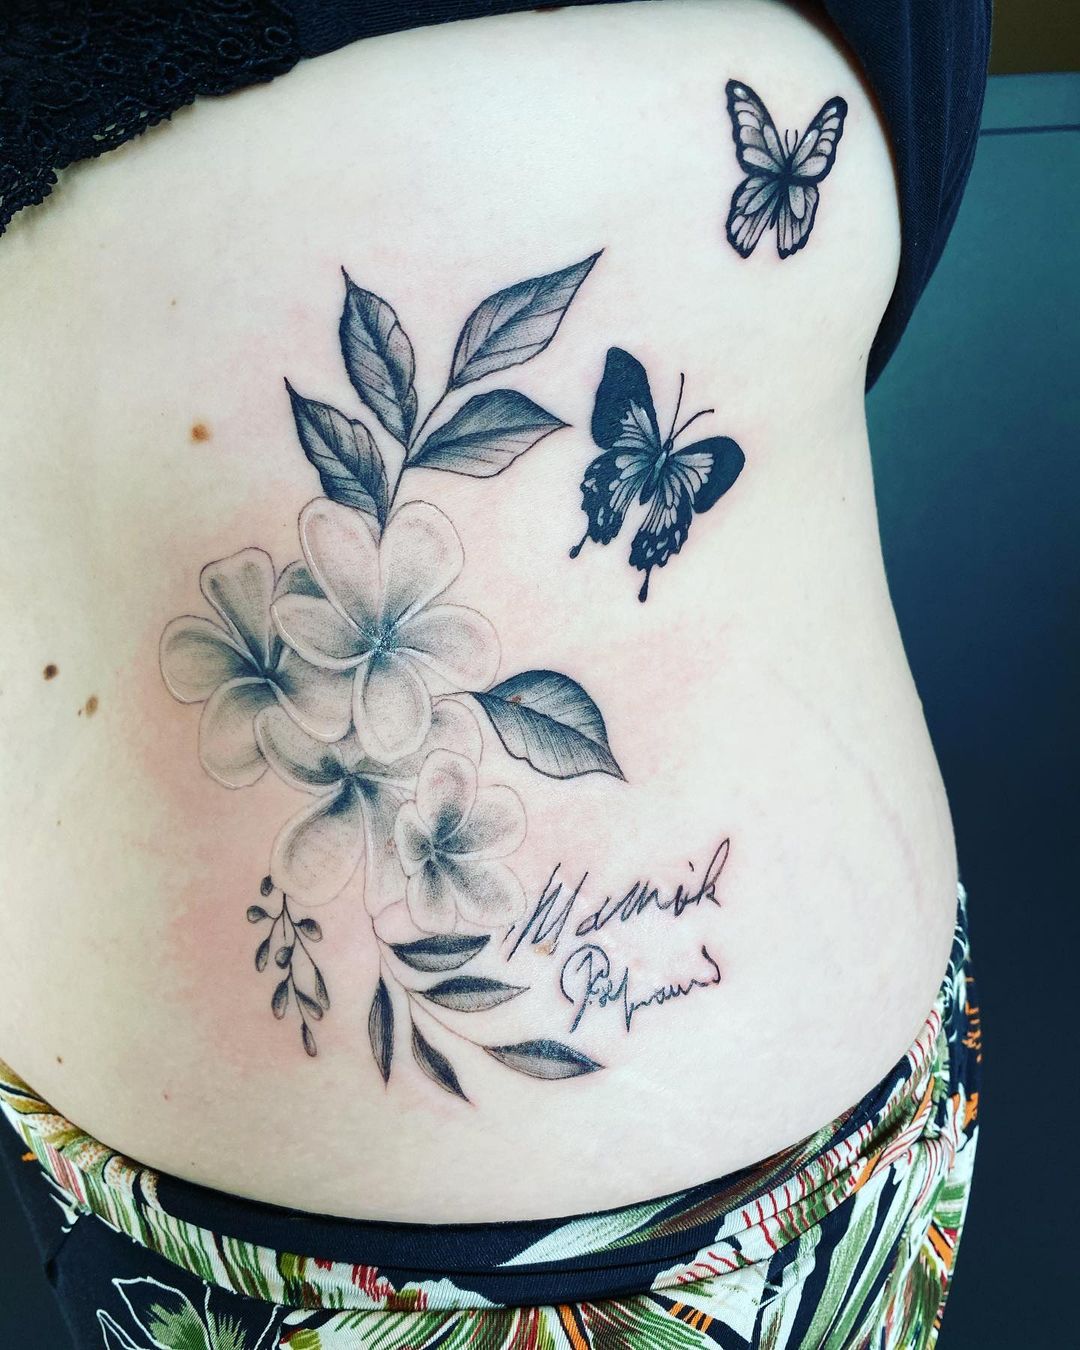 25 Tattoos With Ashes That Tenderly Keep A Loved One Forever